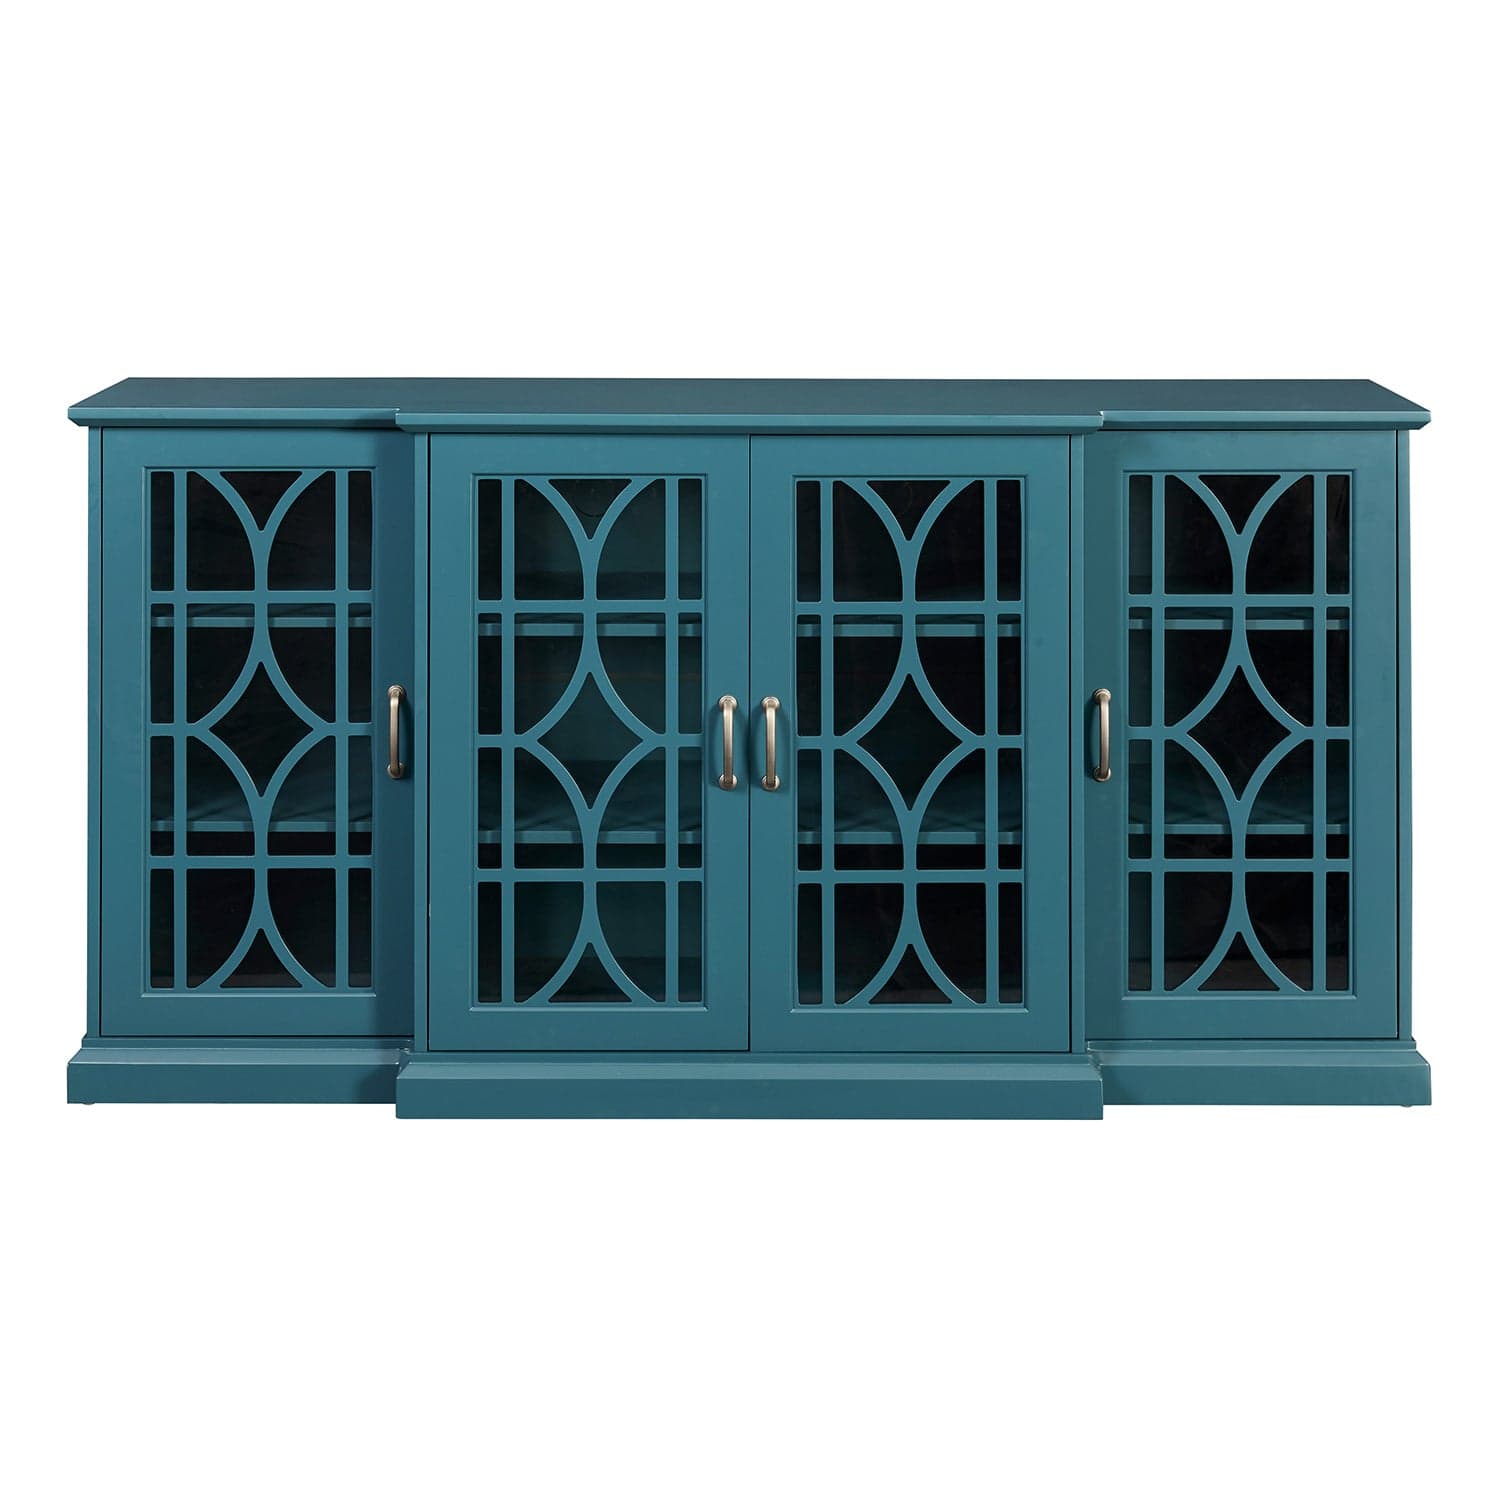 1st Choice Furniture Direct TV Stand 1st Choice Teal Blue TV Stand with Glass Door and Adjustable Shelves